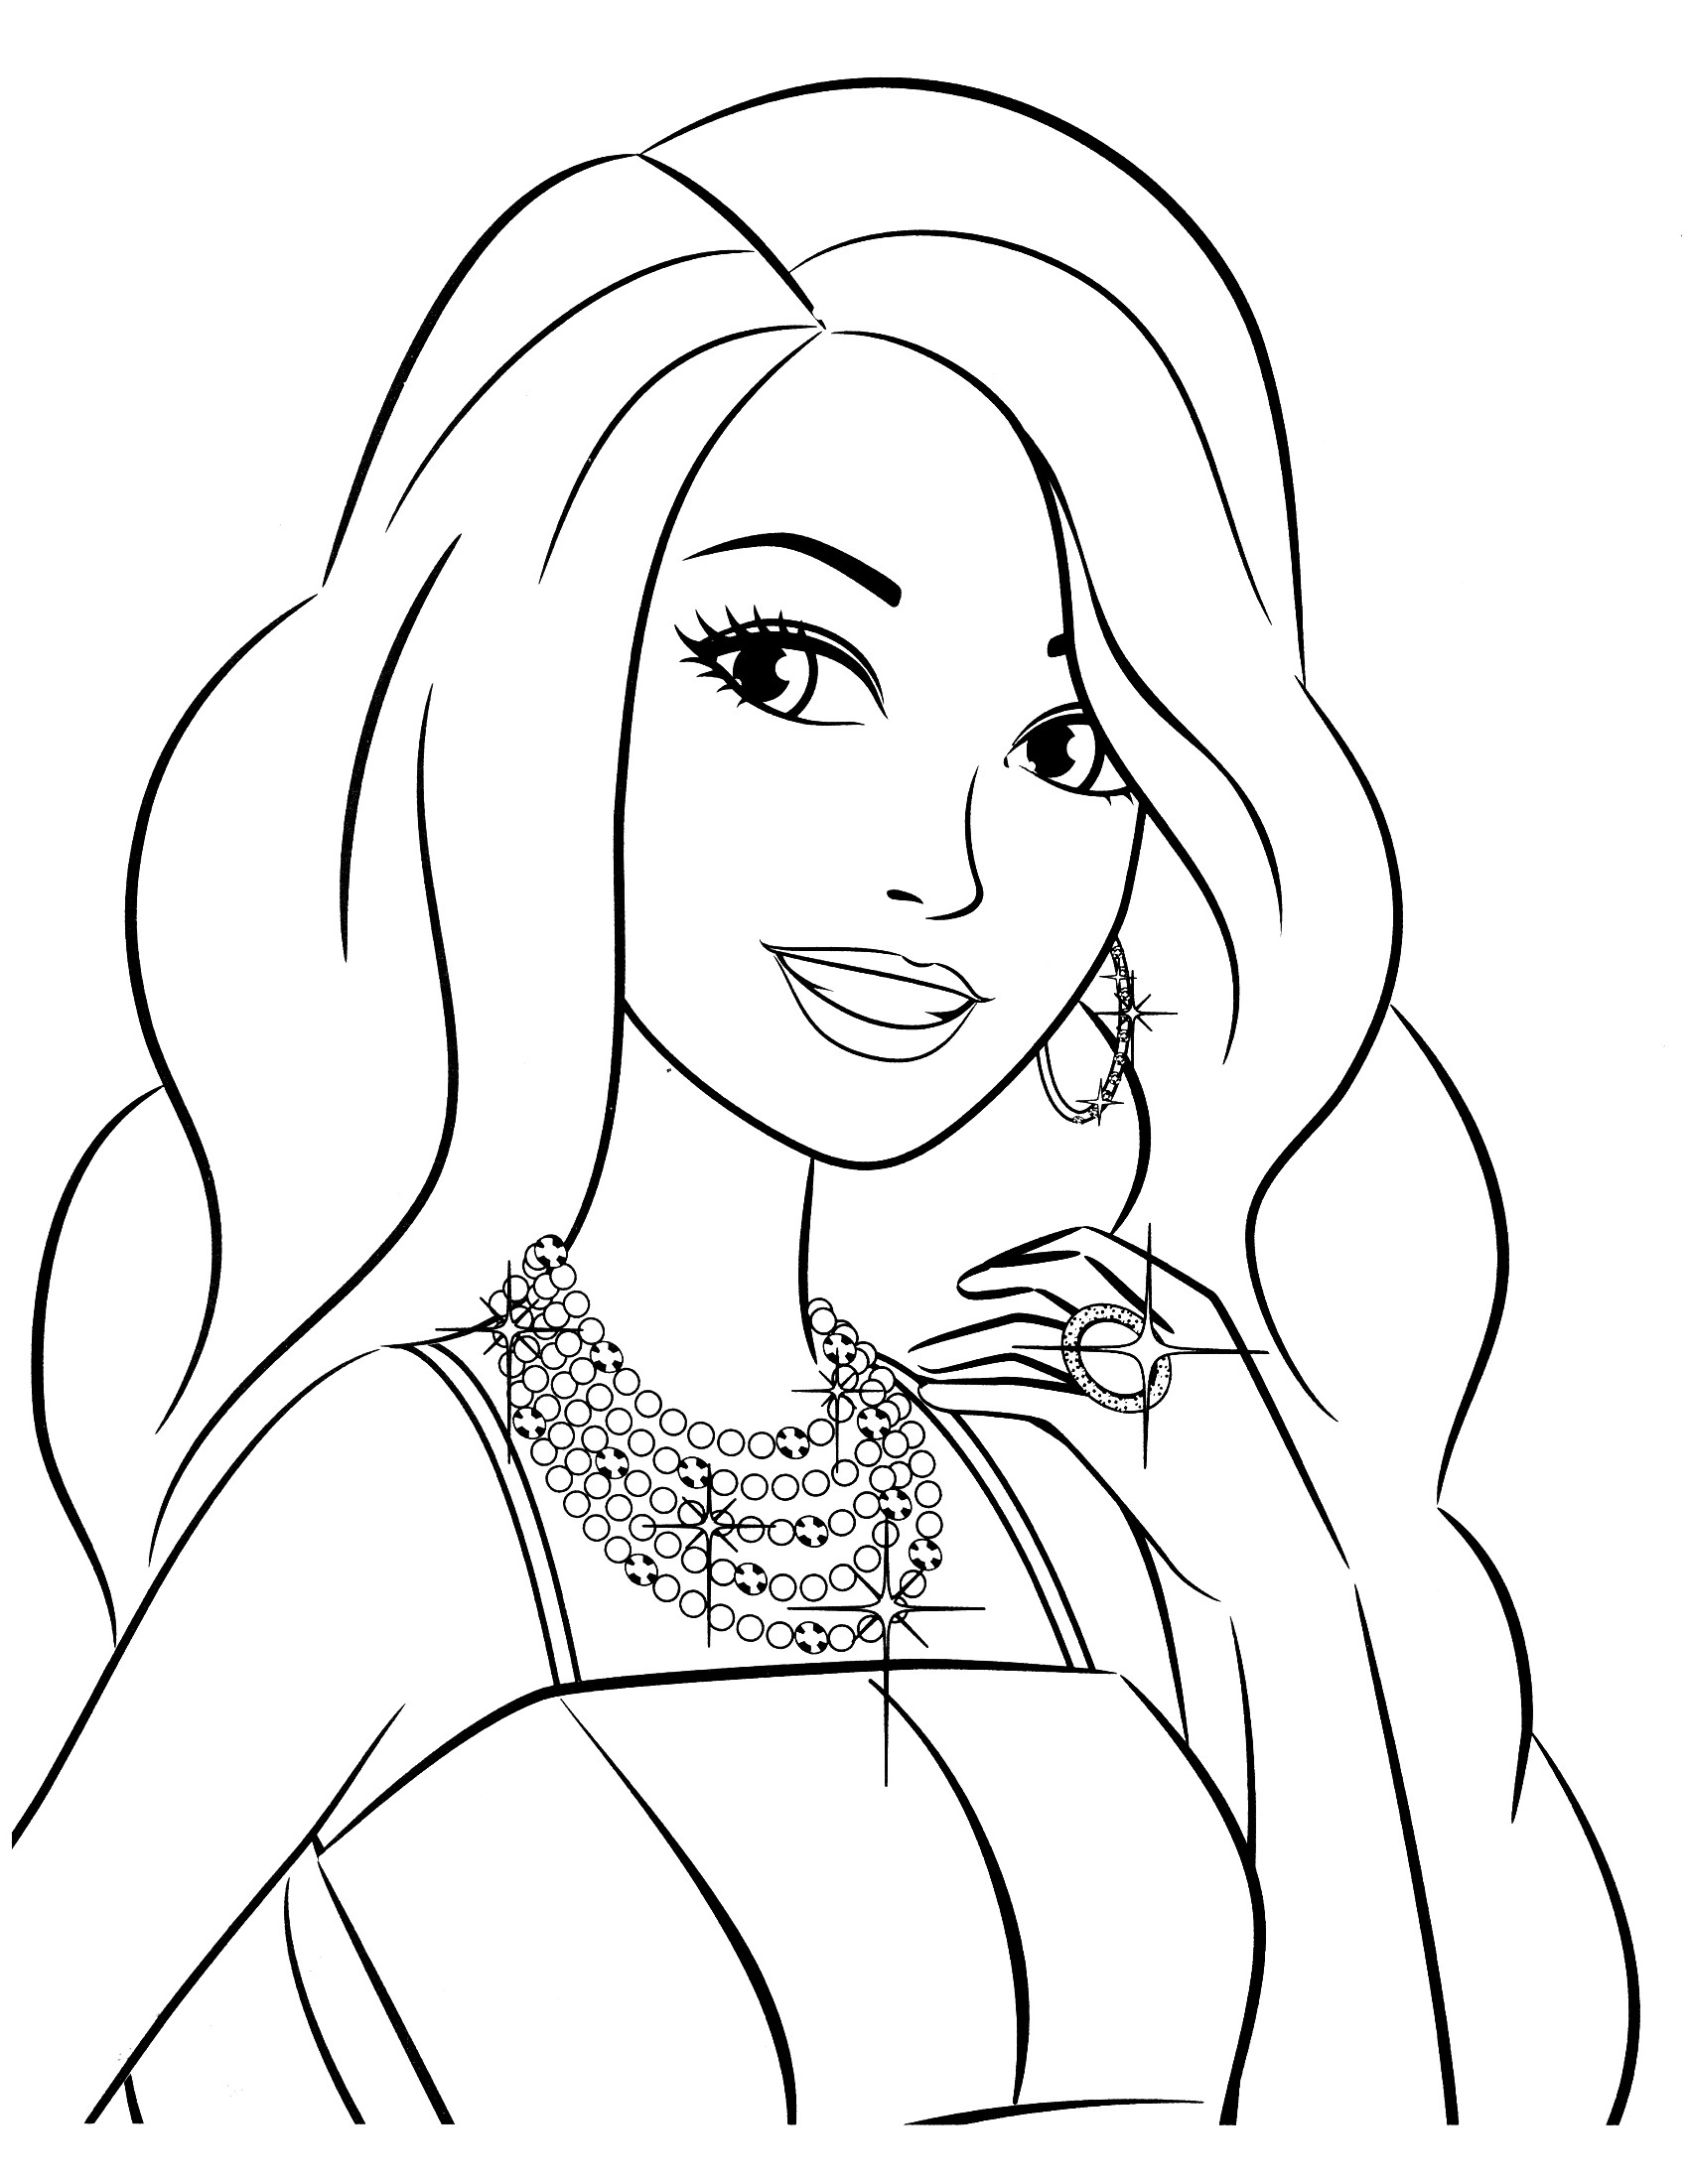 Barbie Coloring Pages Free Printable